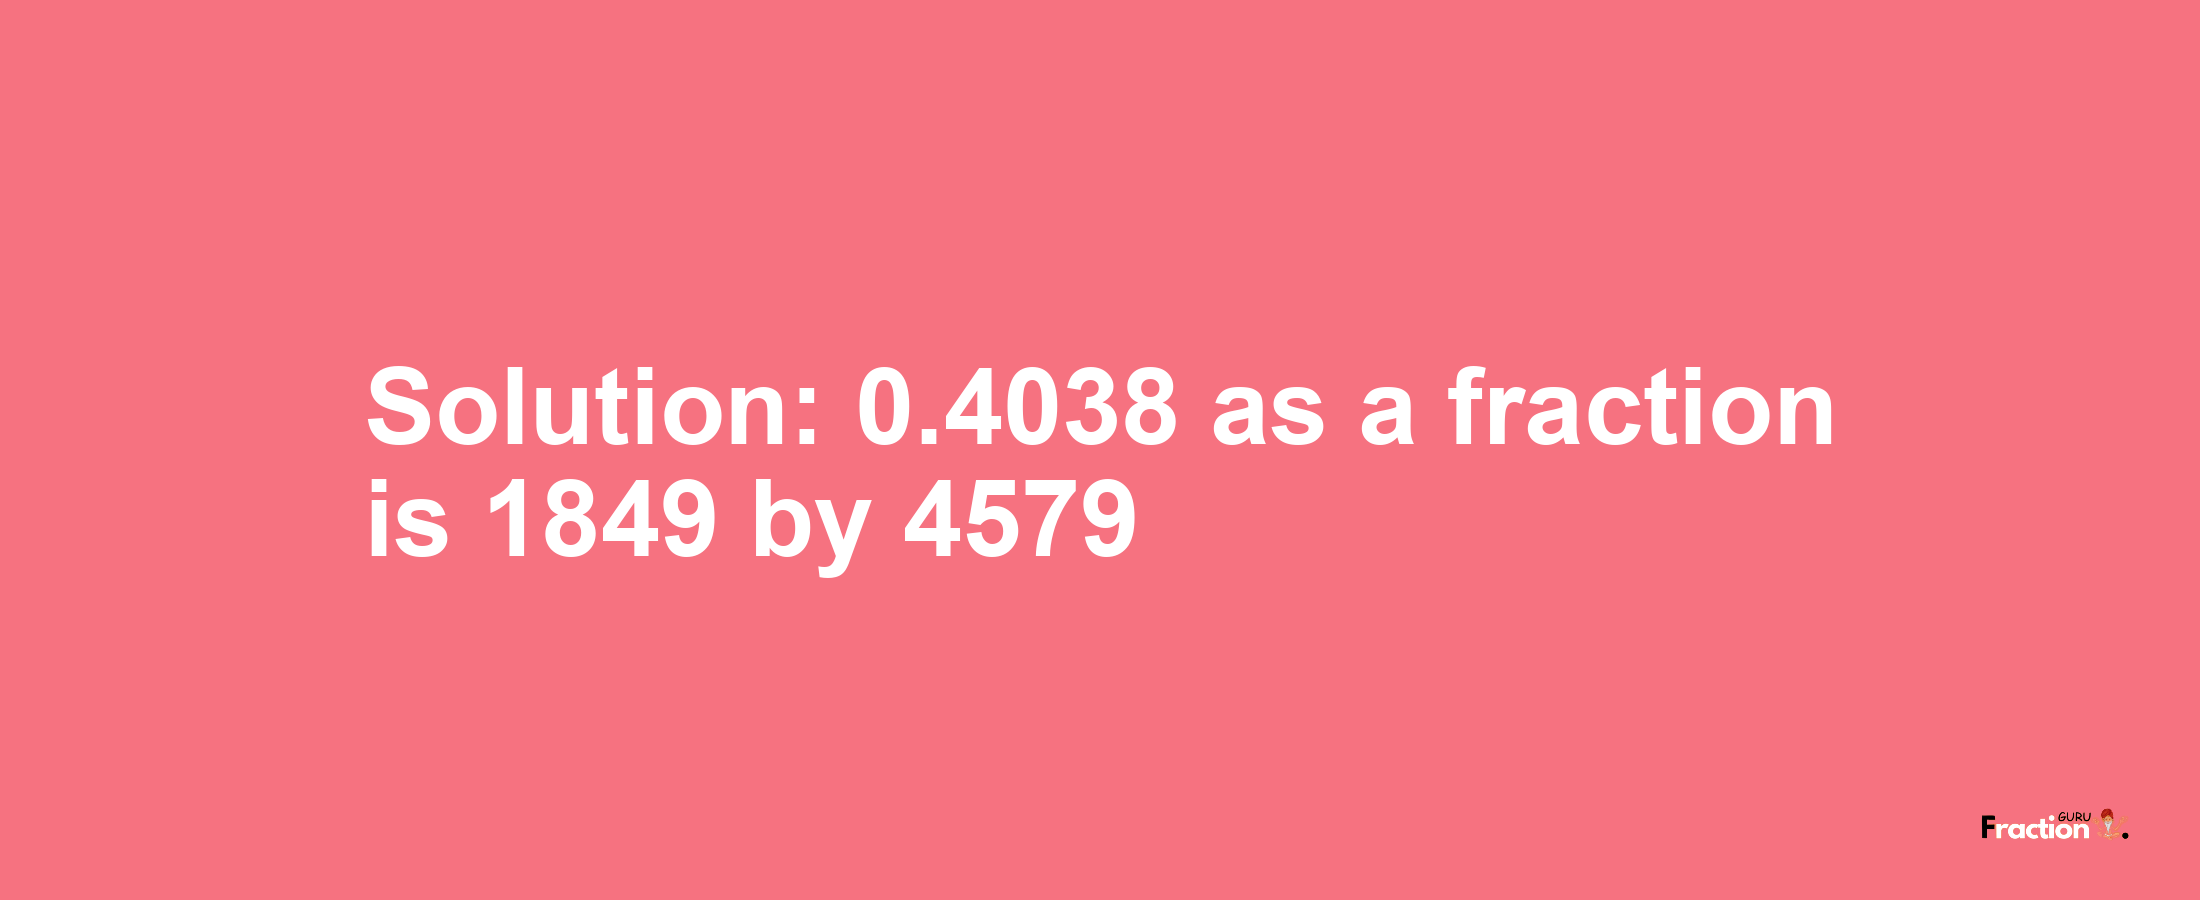 Solution:0.4038 as a fraction is 1849/4579